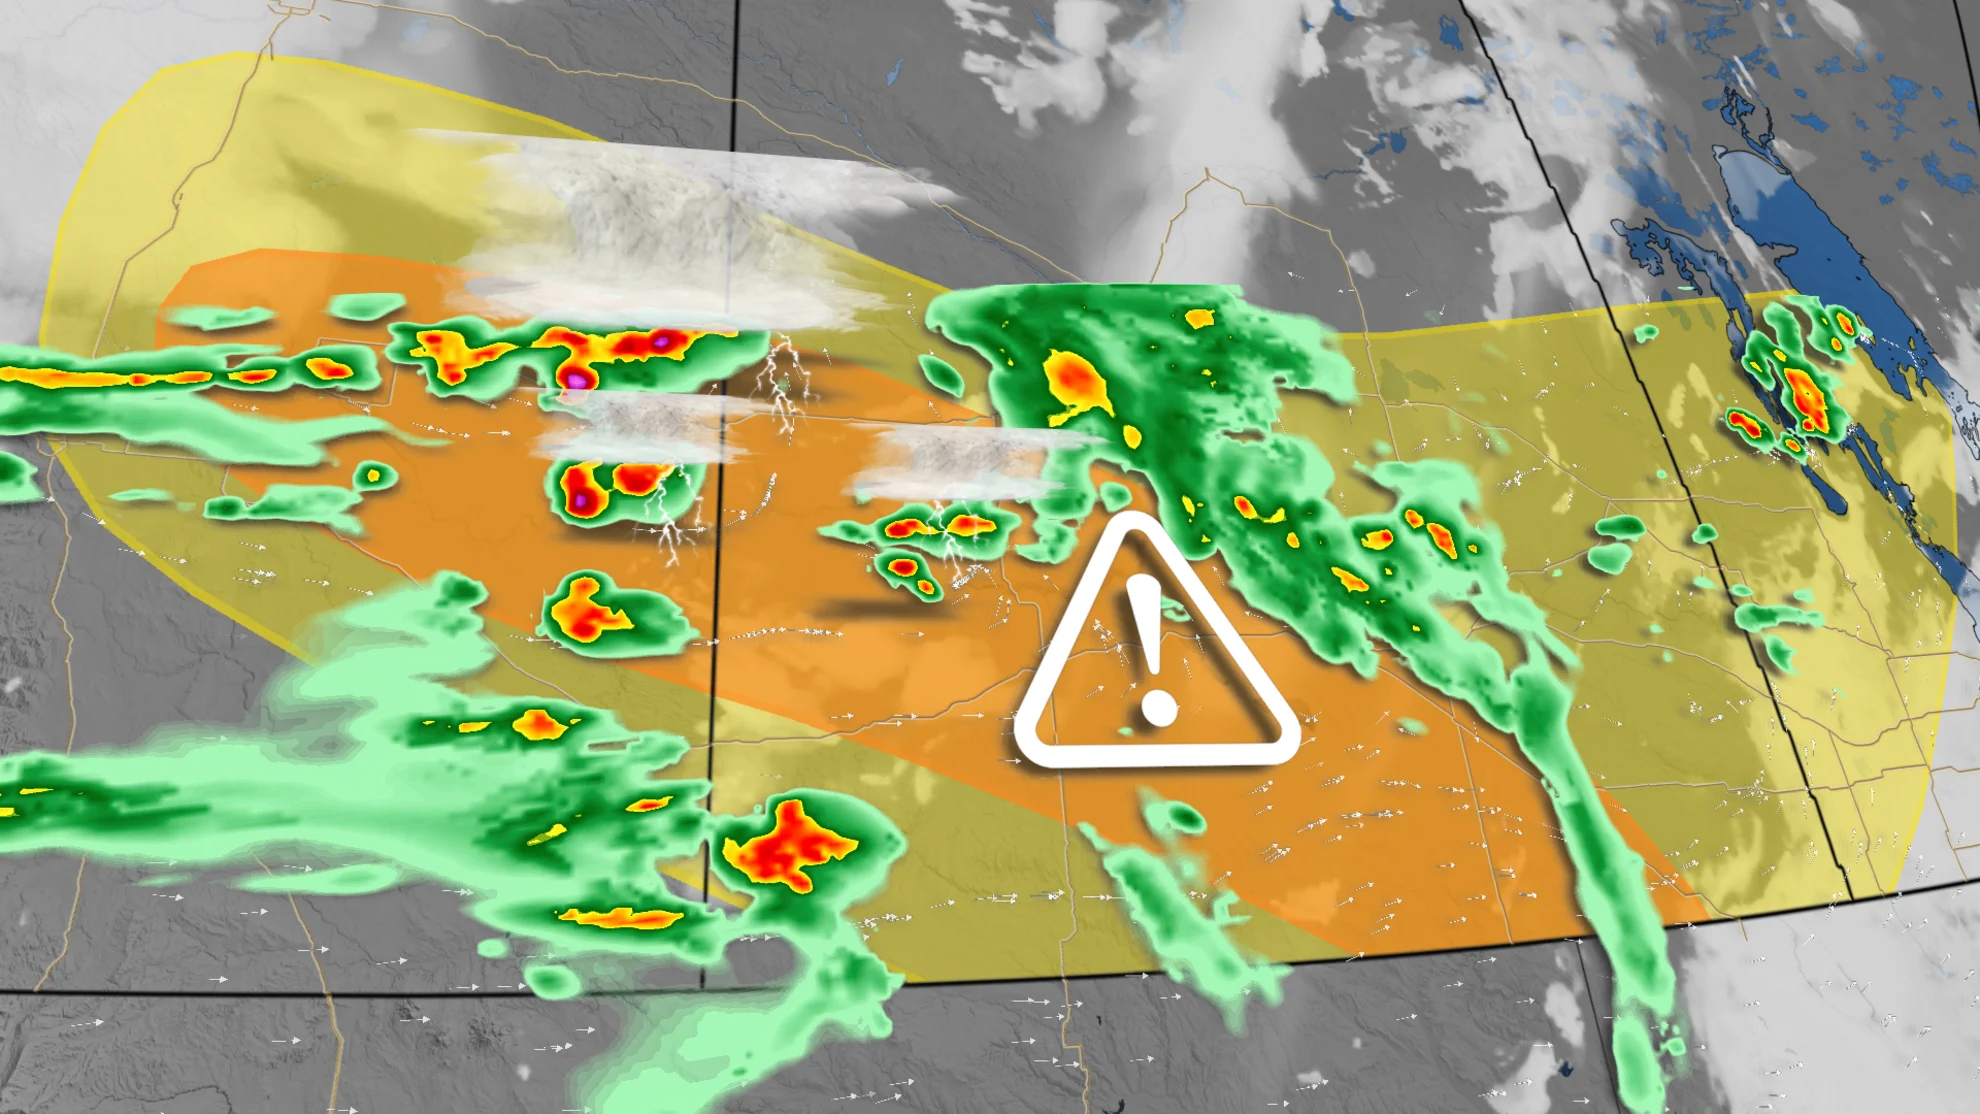 Tornado warning issued in southern Alberta amid severe storms